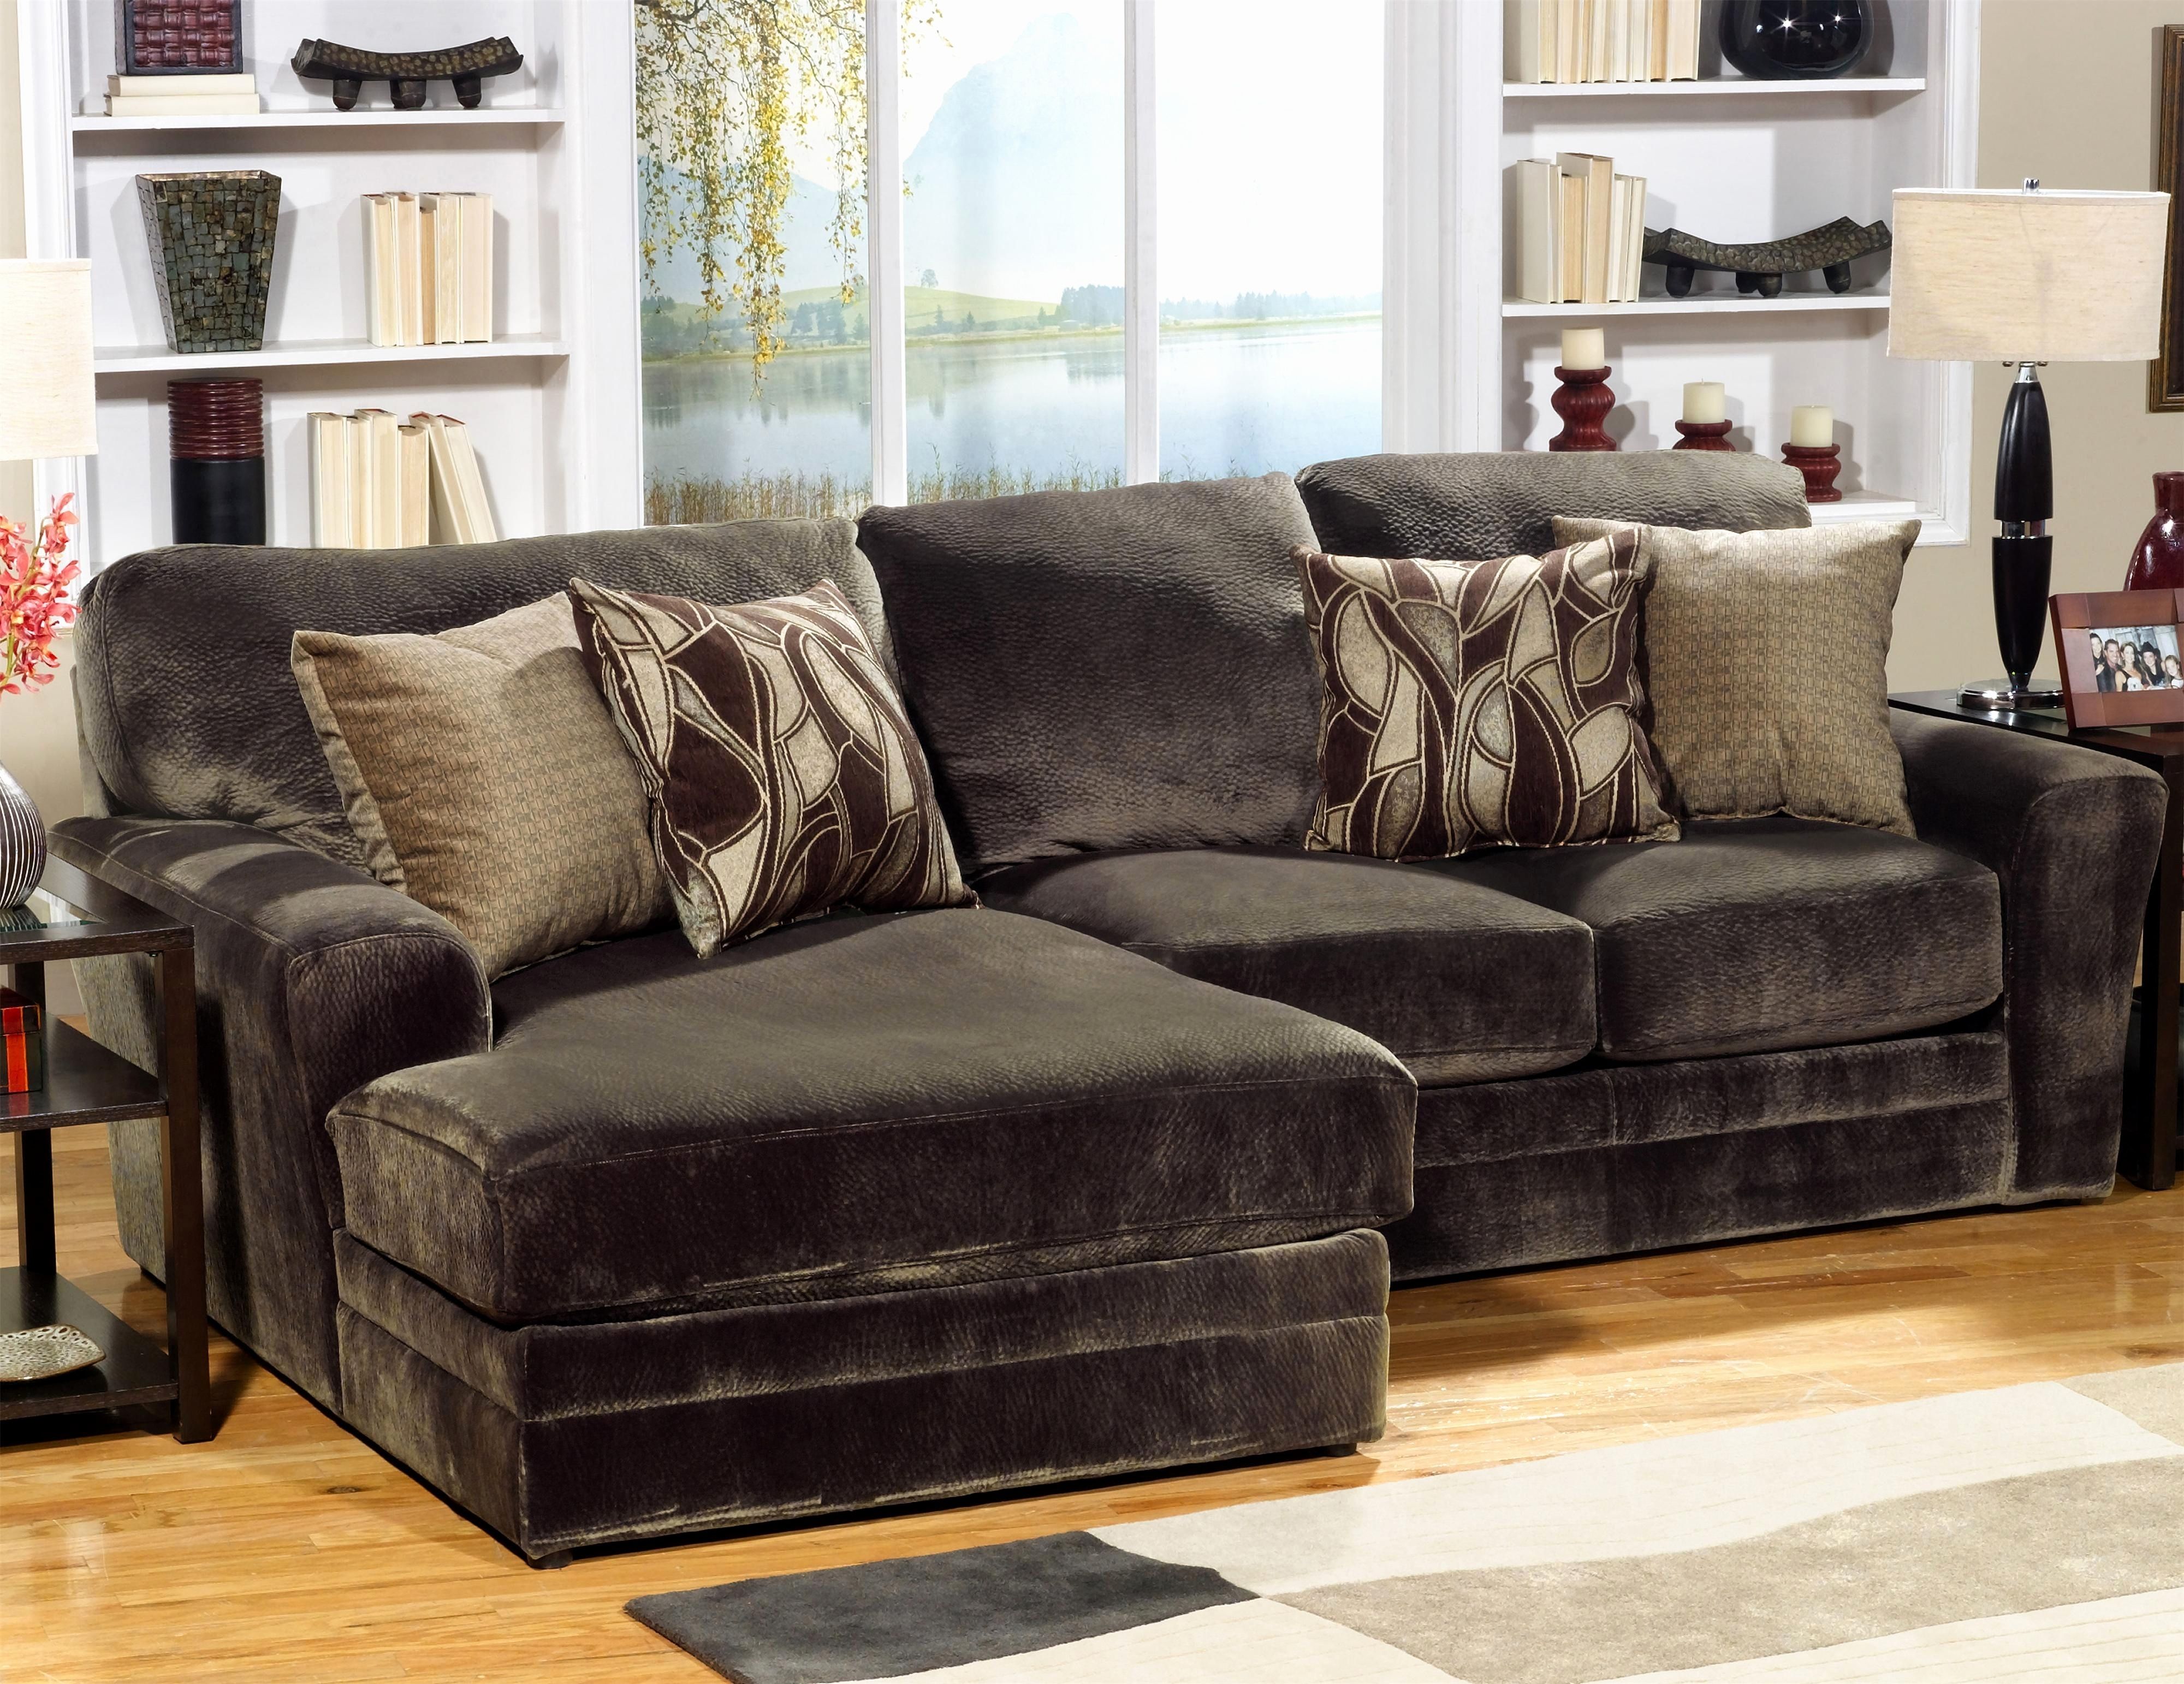 Living Room Furniture Lancaster Pa Awesome Shop Sectionals – Living With Lancaster Pa Sectional Sofas (View 1 of 10)